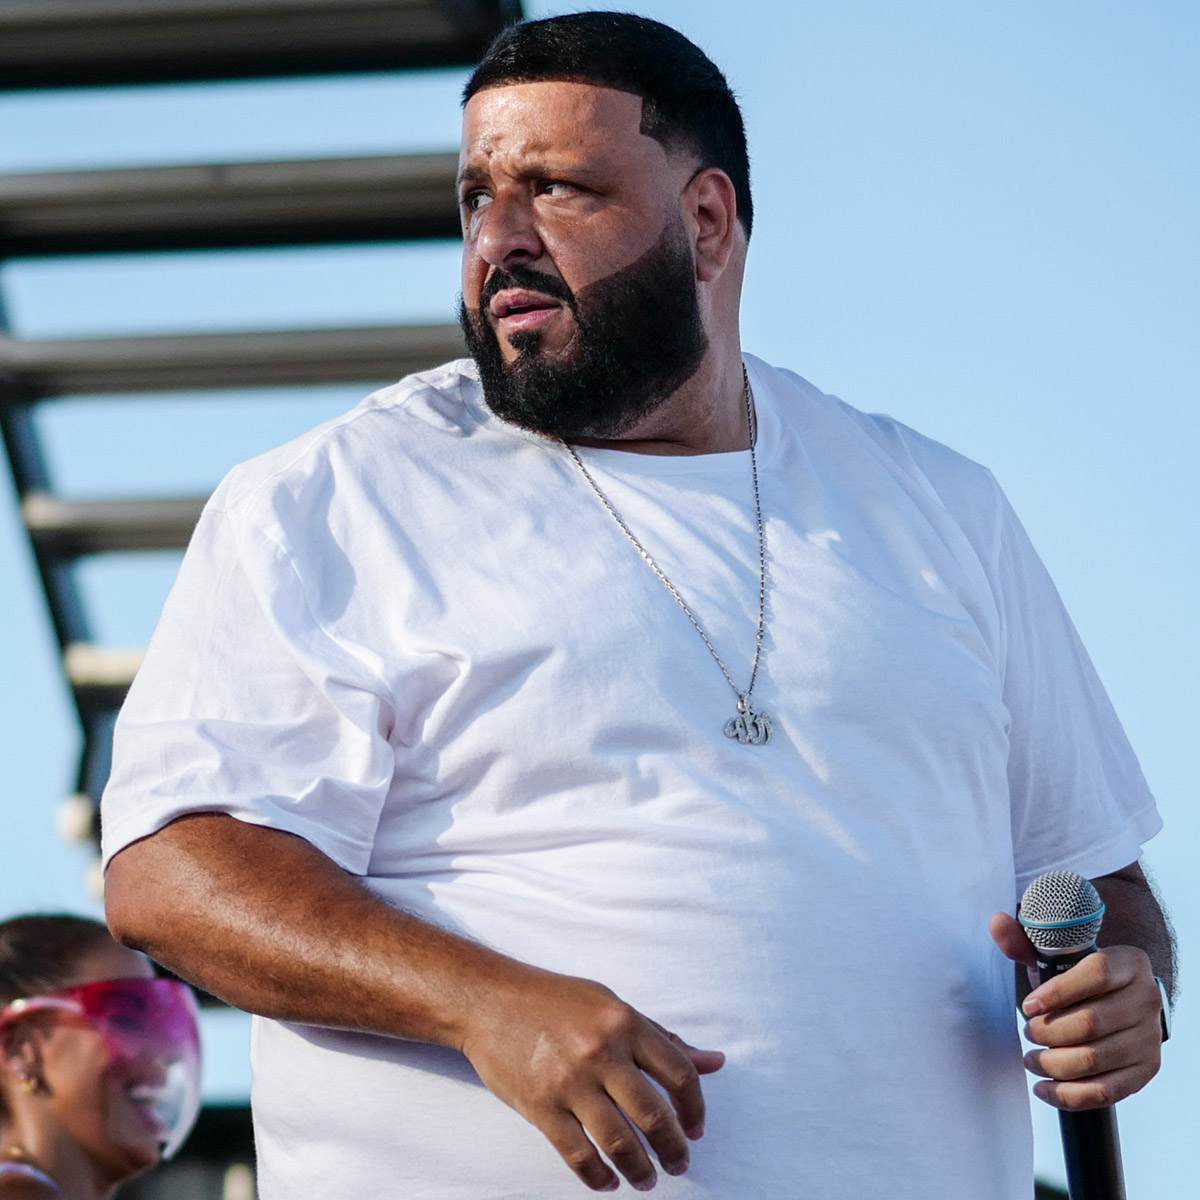 DJ Khaled Shares Video of His Painful Surfing Accident